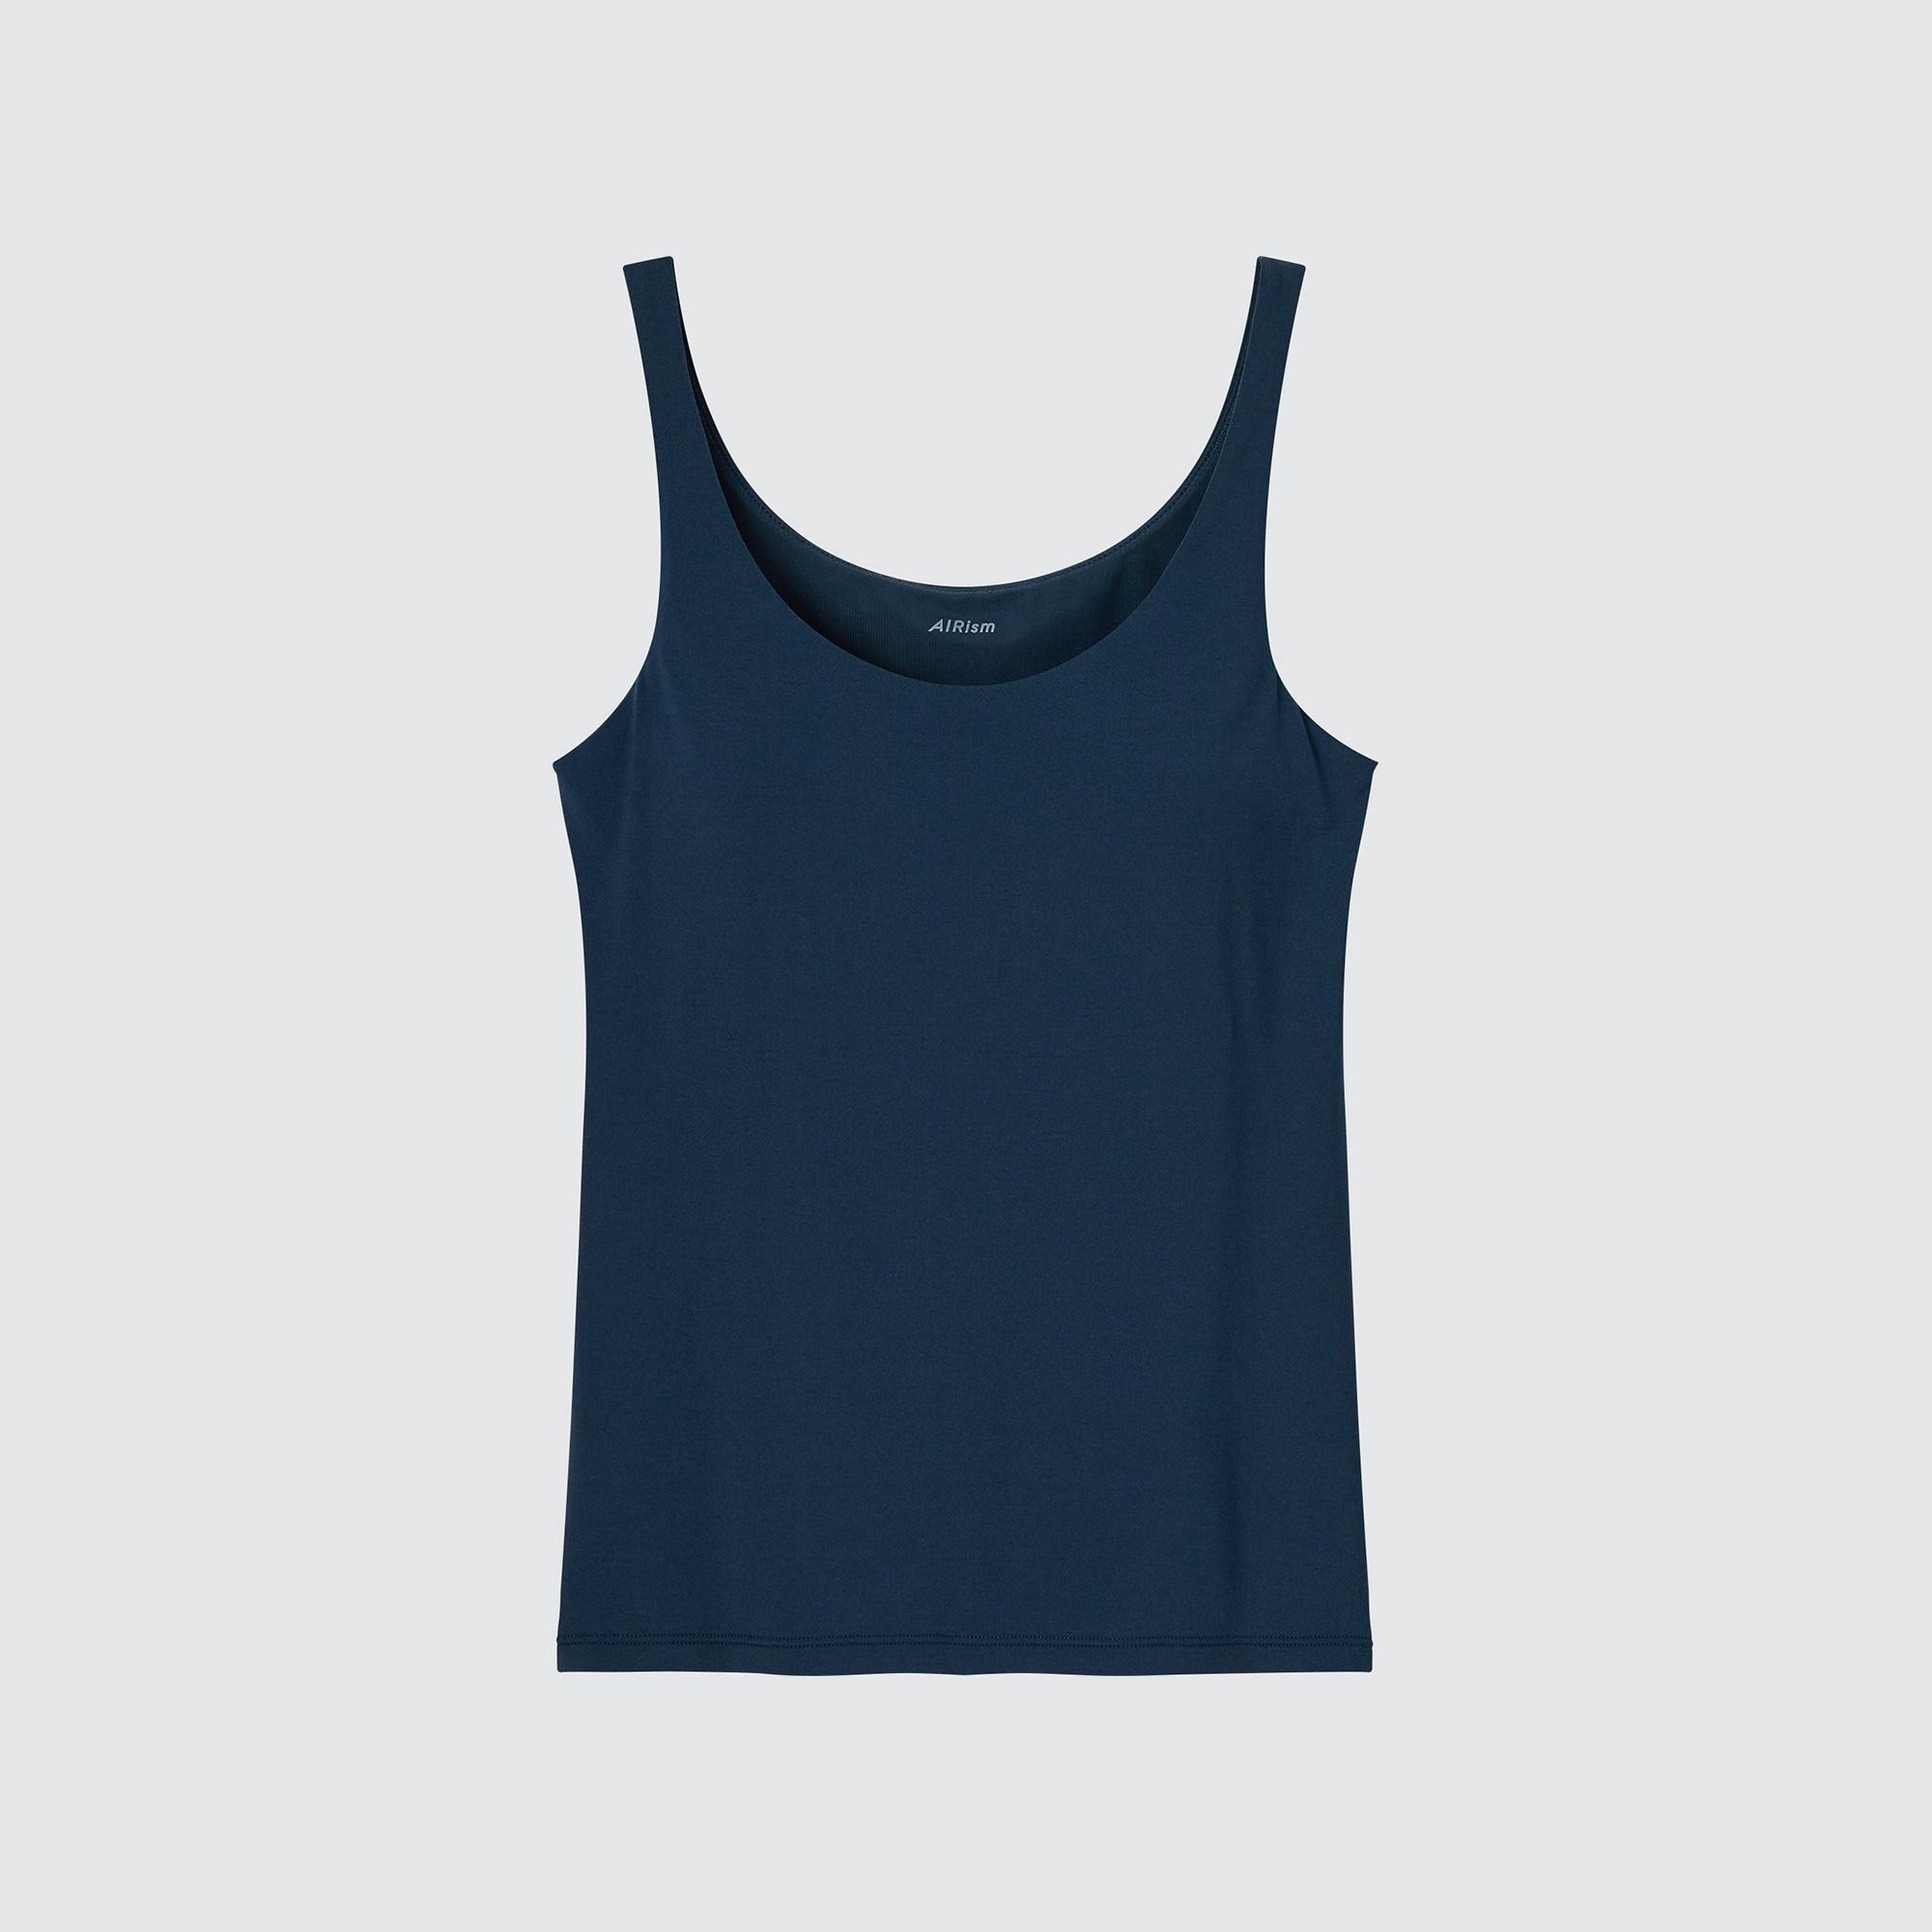 Uniqlo Airism Ribbed Tank Top Padded Womens Fashion Tops Sleeveless  on Carousell